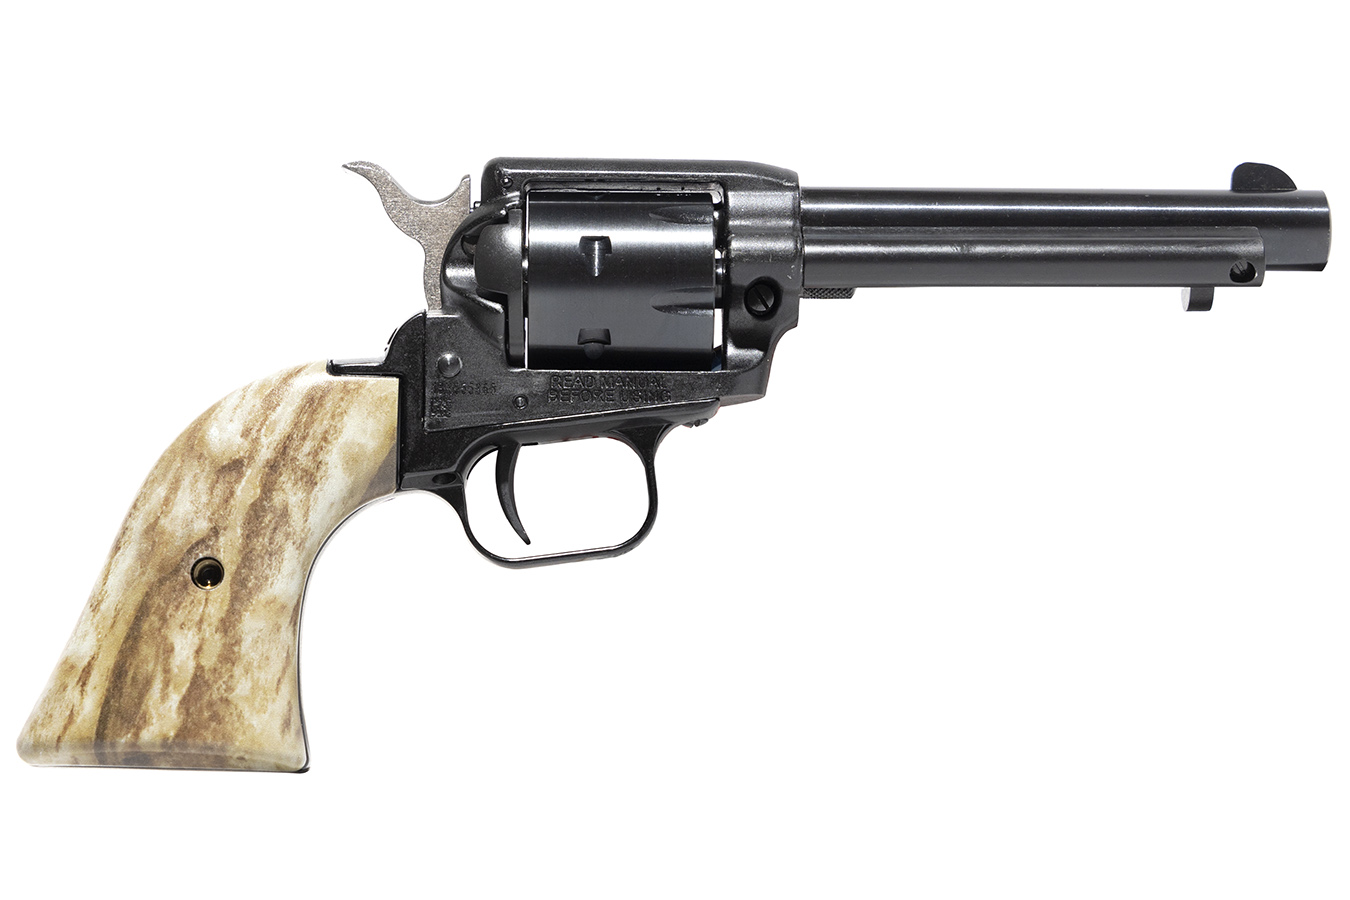 HERITAGE ROUGH RIDER 22CALREVOLVER WITH BLUED BARREL AND STAG GRIPS